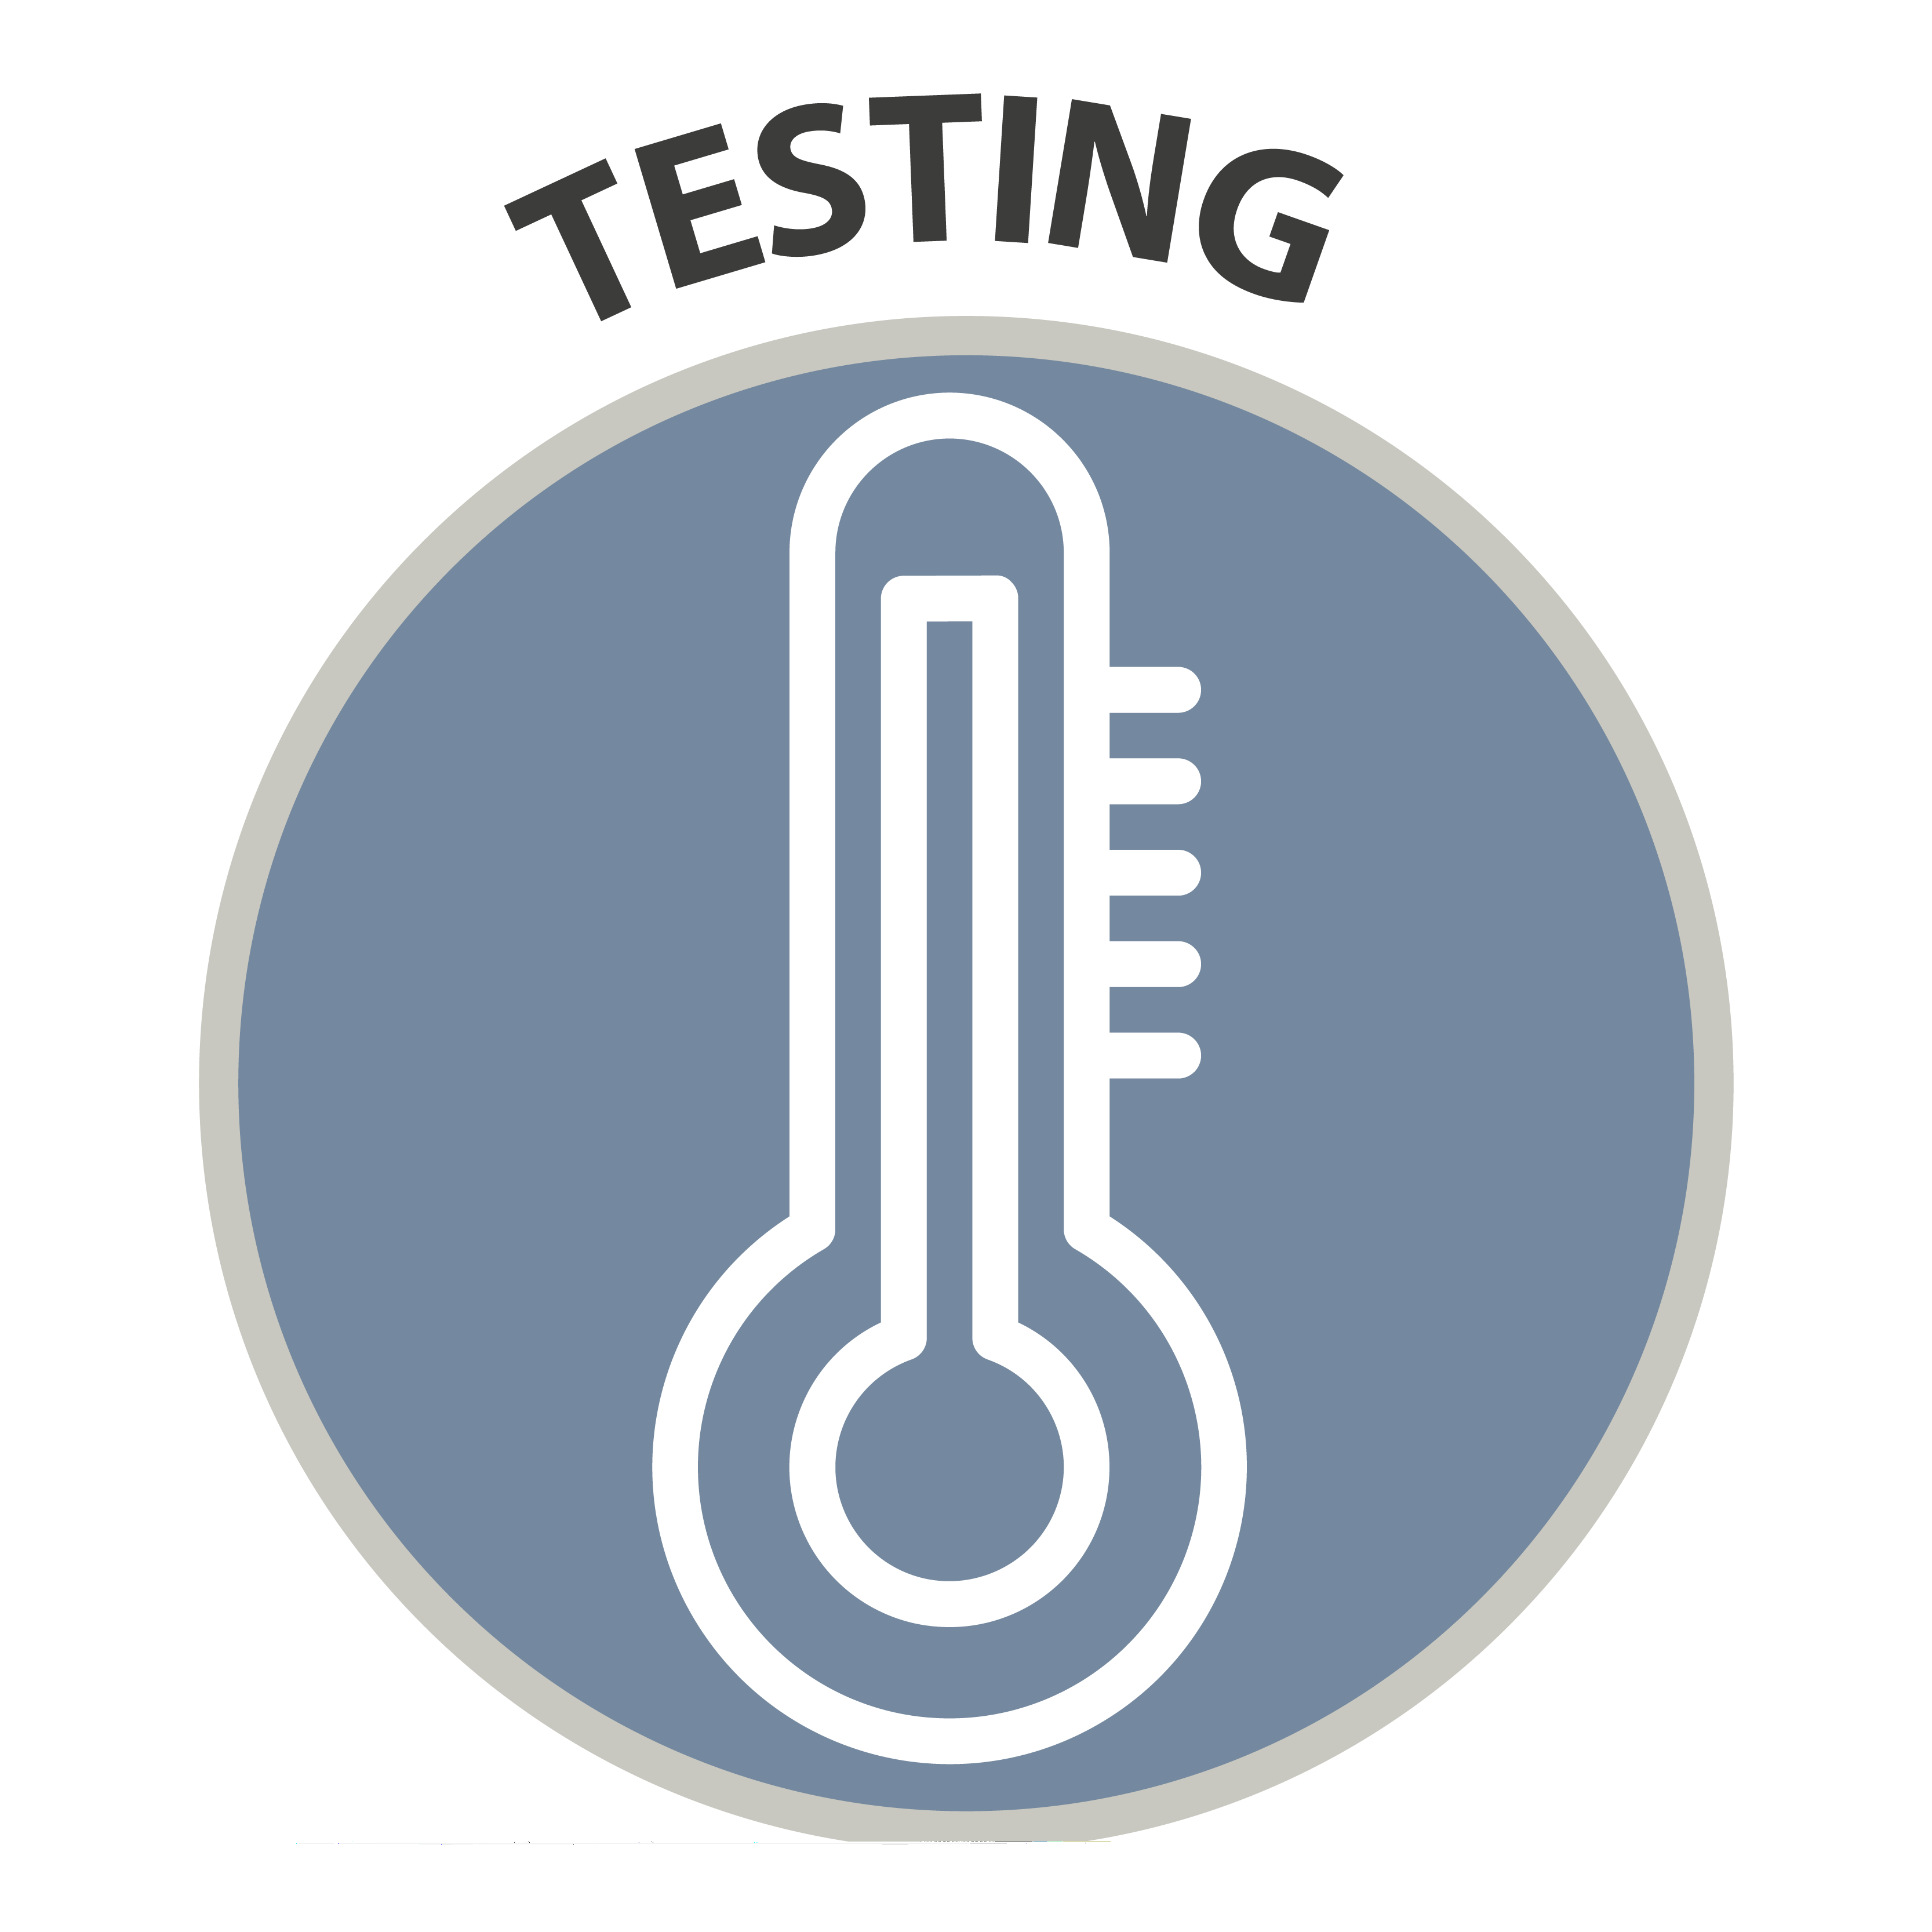 Testing - icon of thermometer